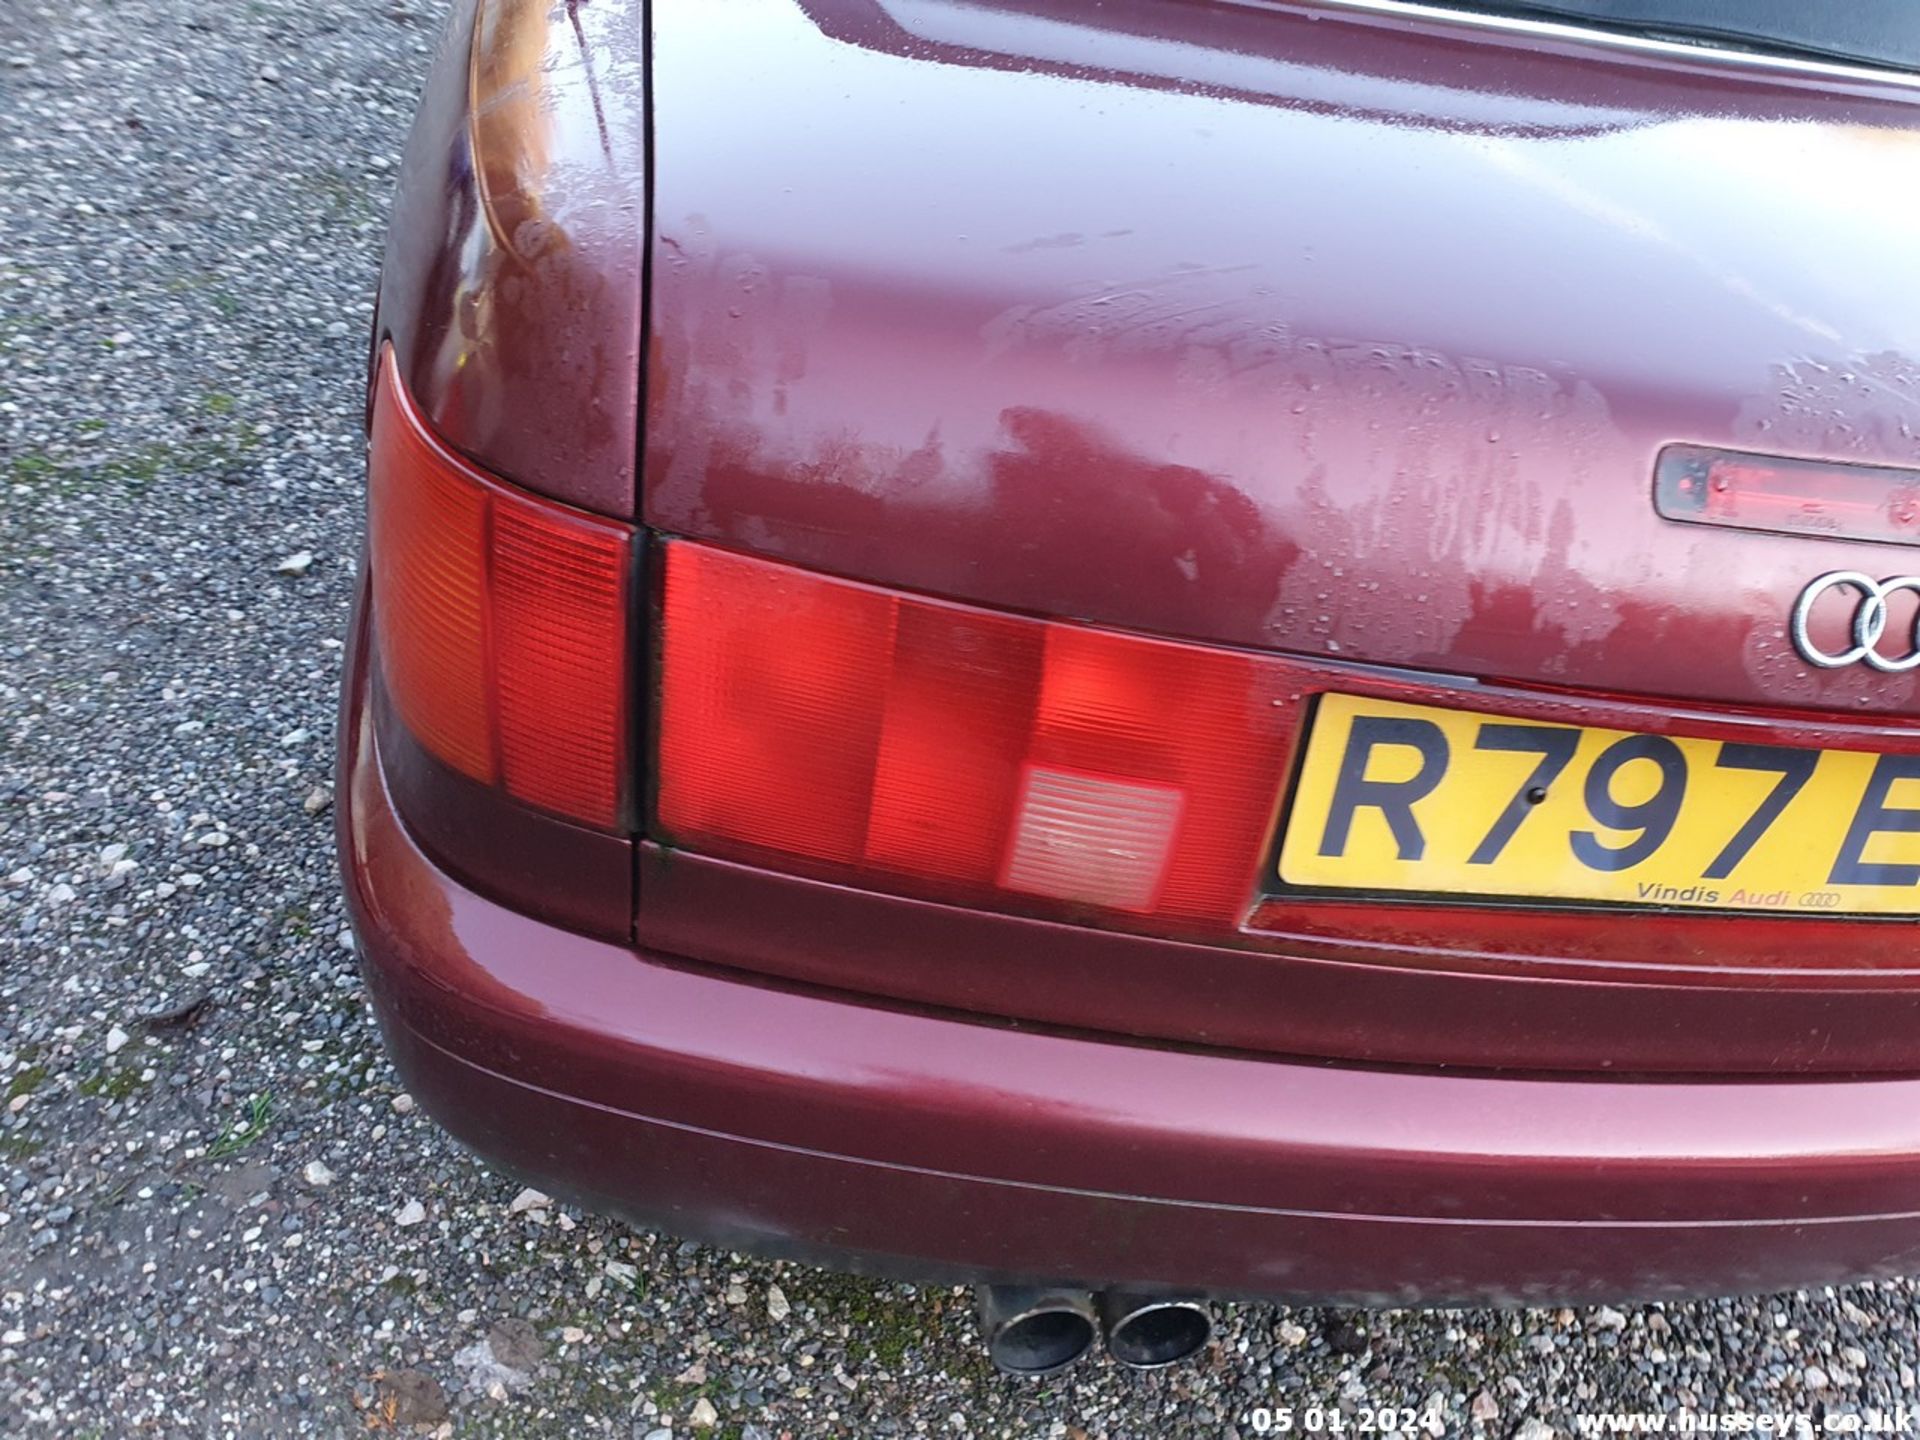 1998 AUDI CABRIOLET 1.8 - 1781cc 2dr Convertible (Red) - Image 27 of 39